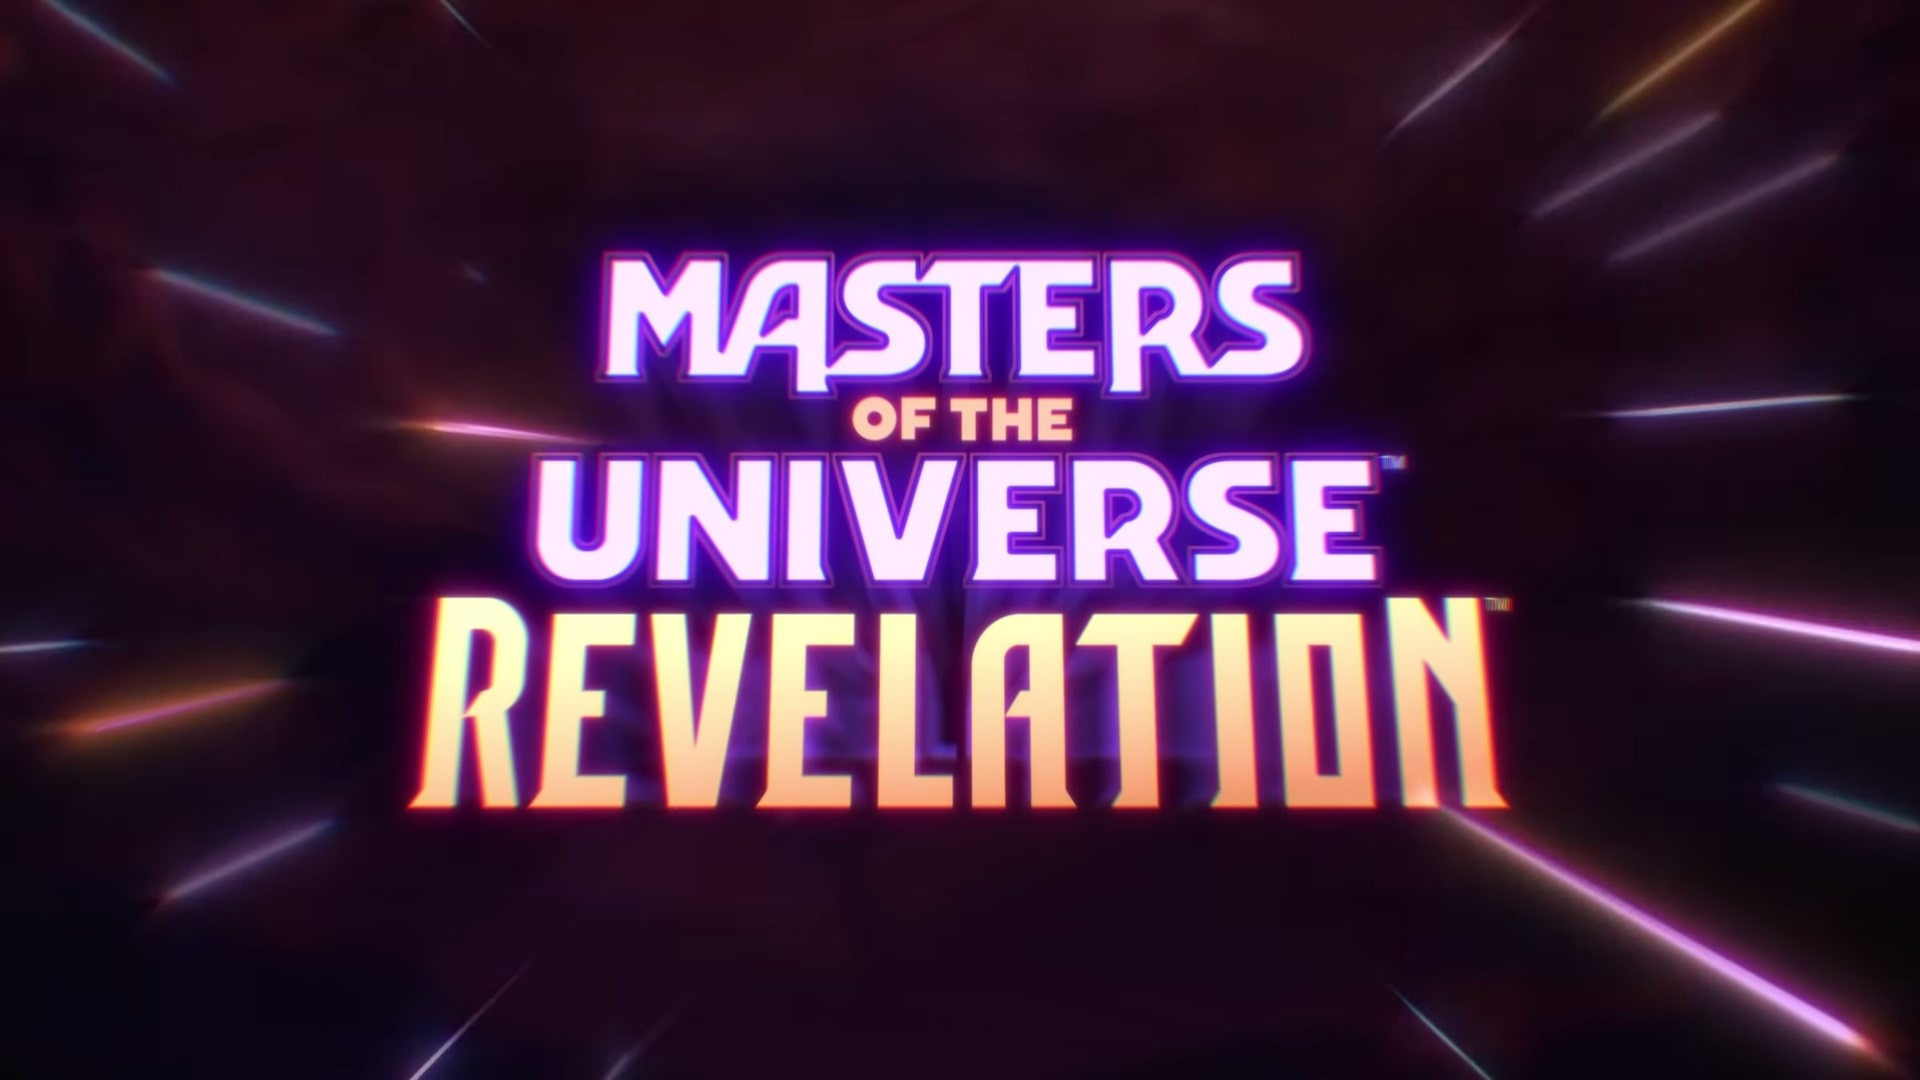 Netflix Masters of the Universe Revelation Trailer, Coming to Netflix in July 2021